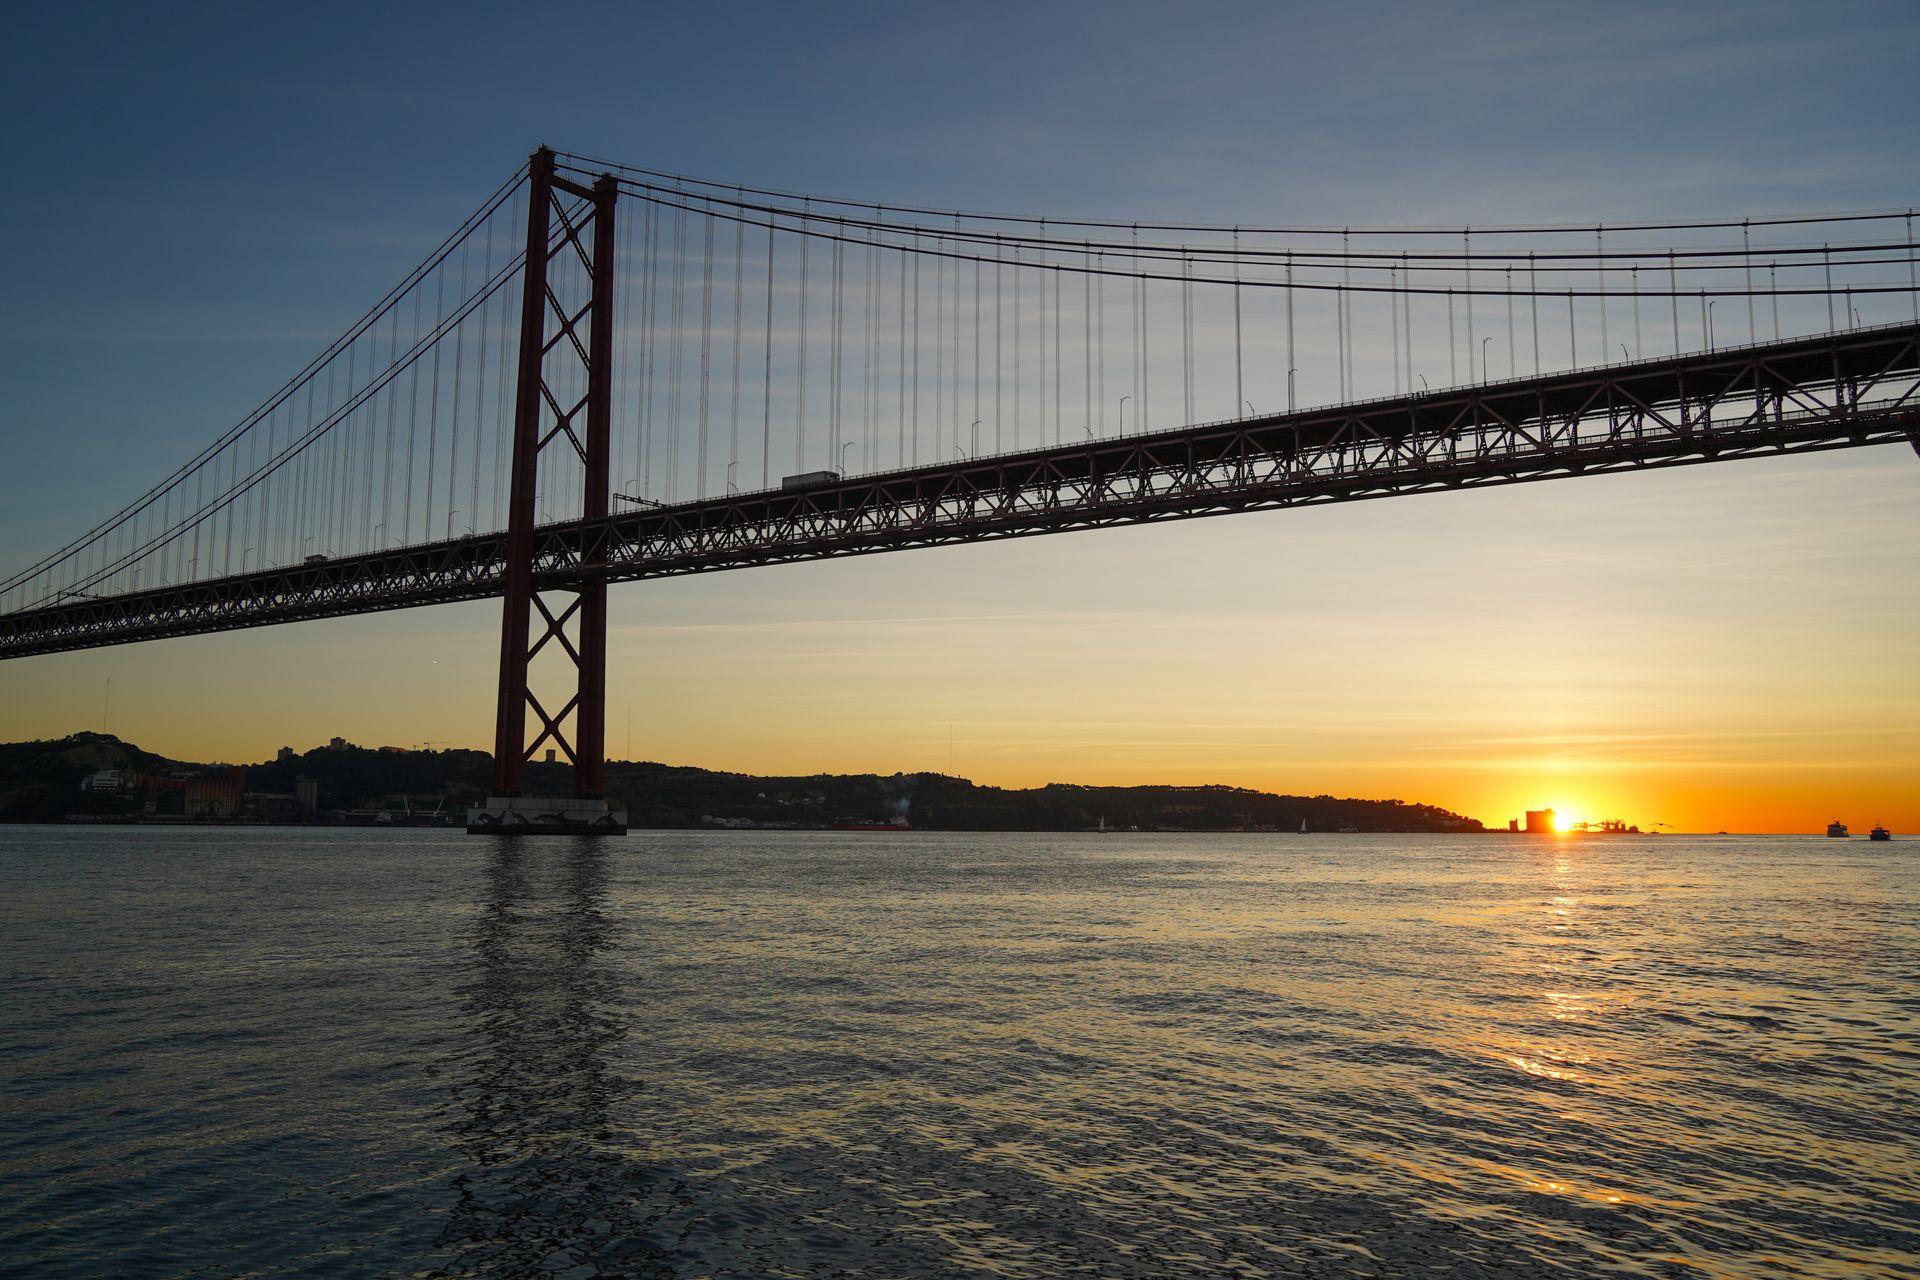 Looking at the Ponte 25 de Abril Bridge during sunset.